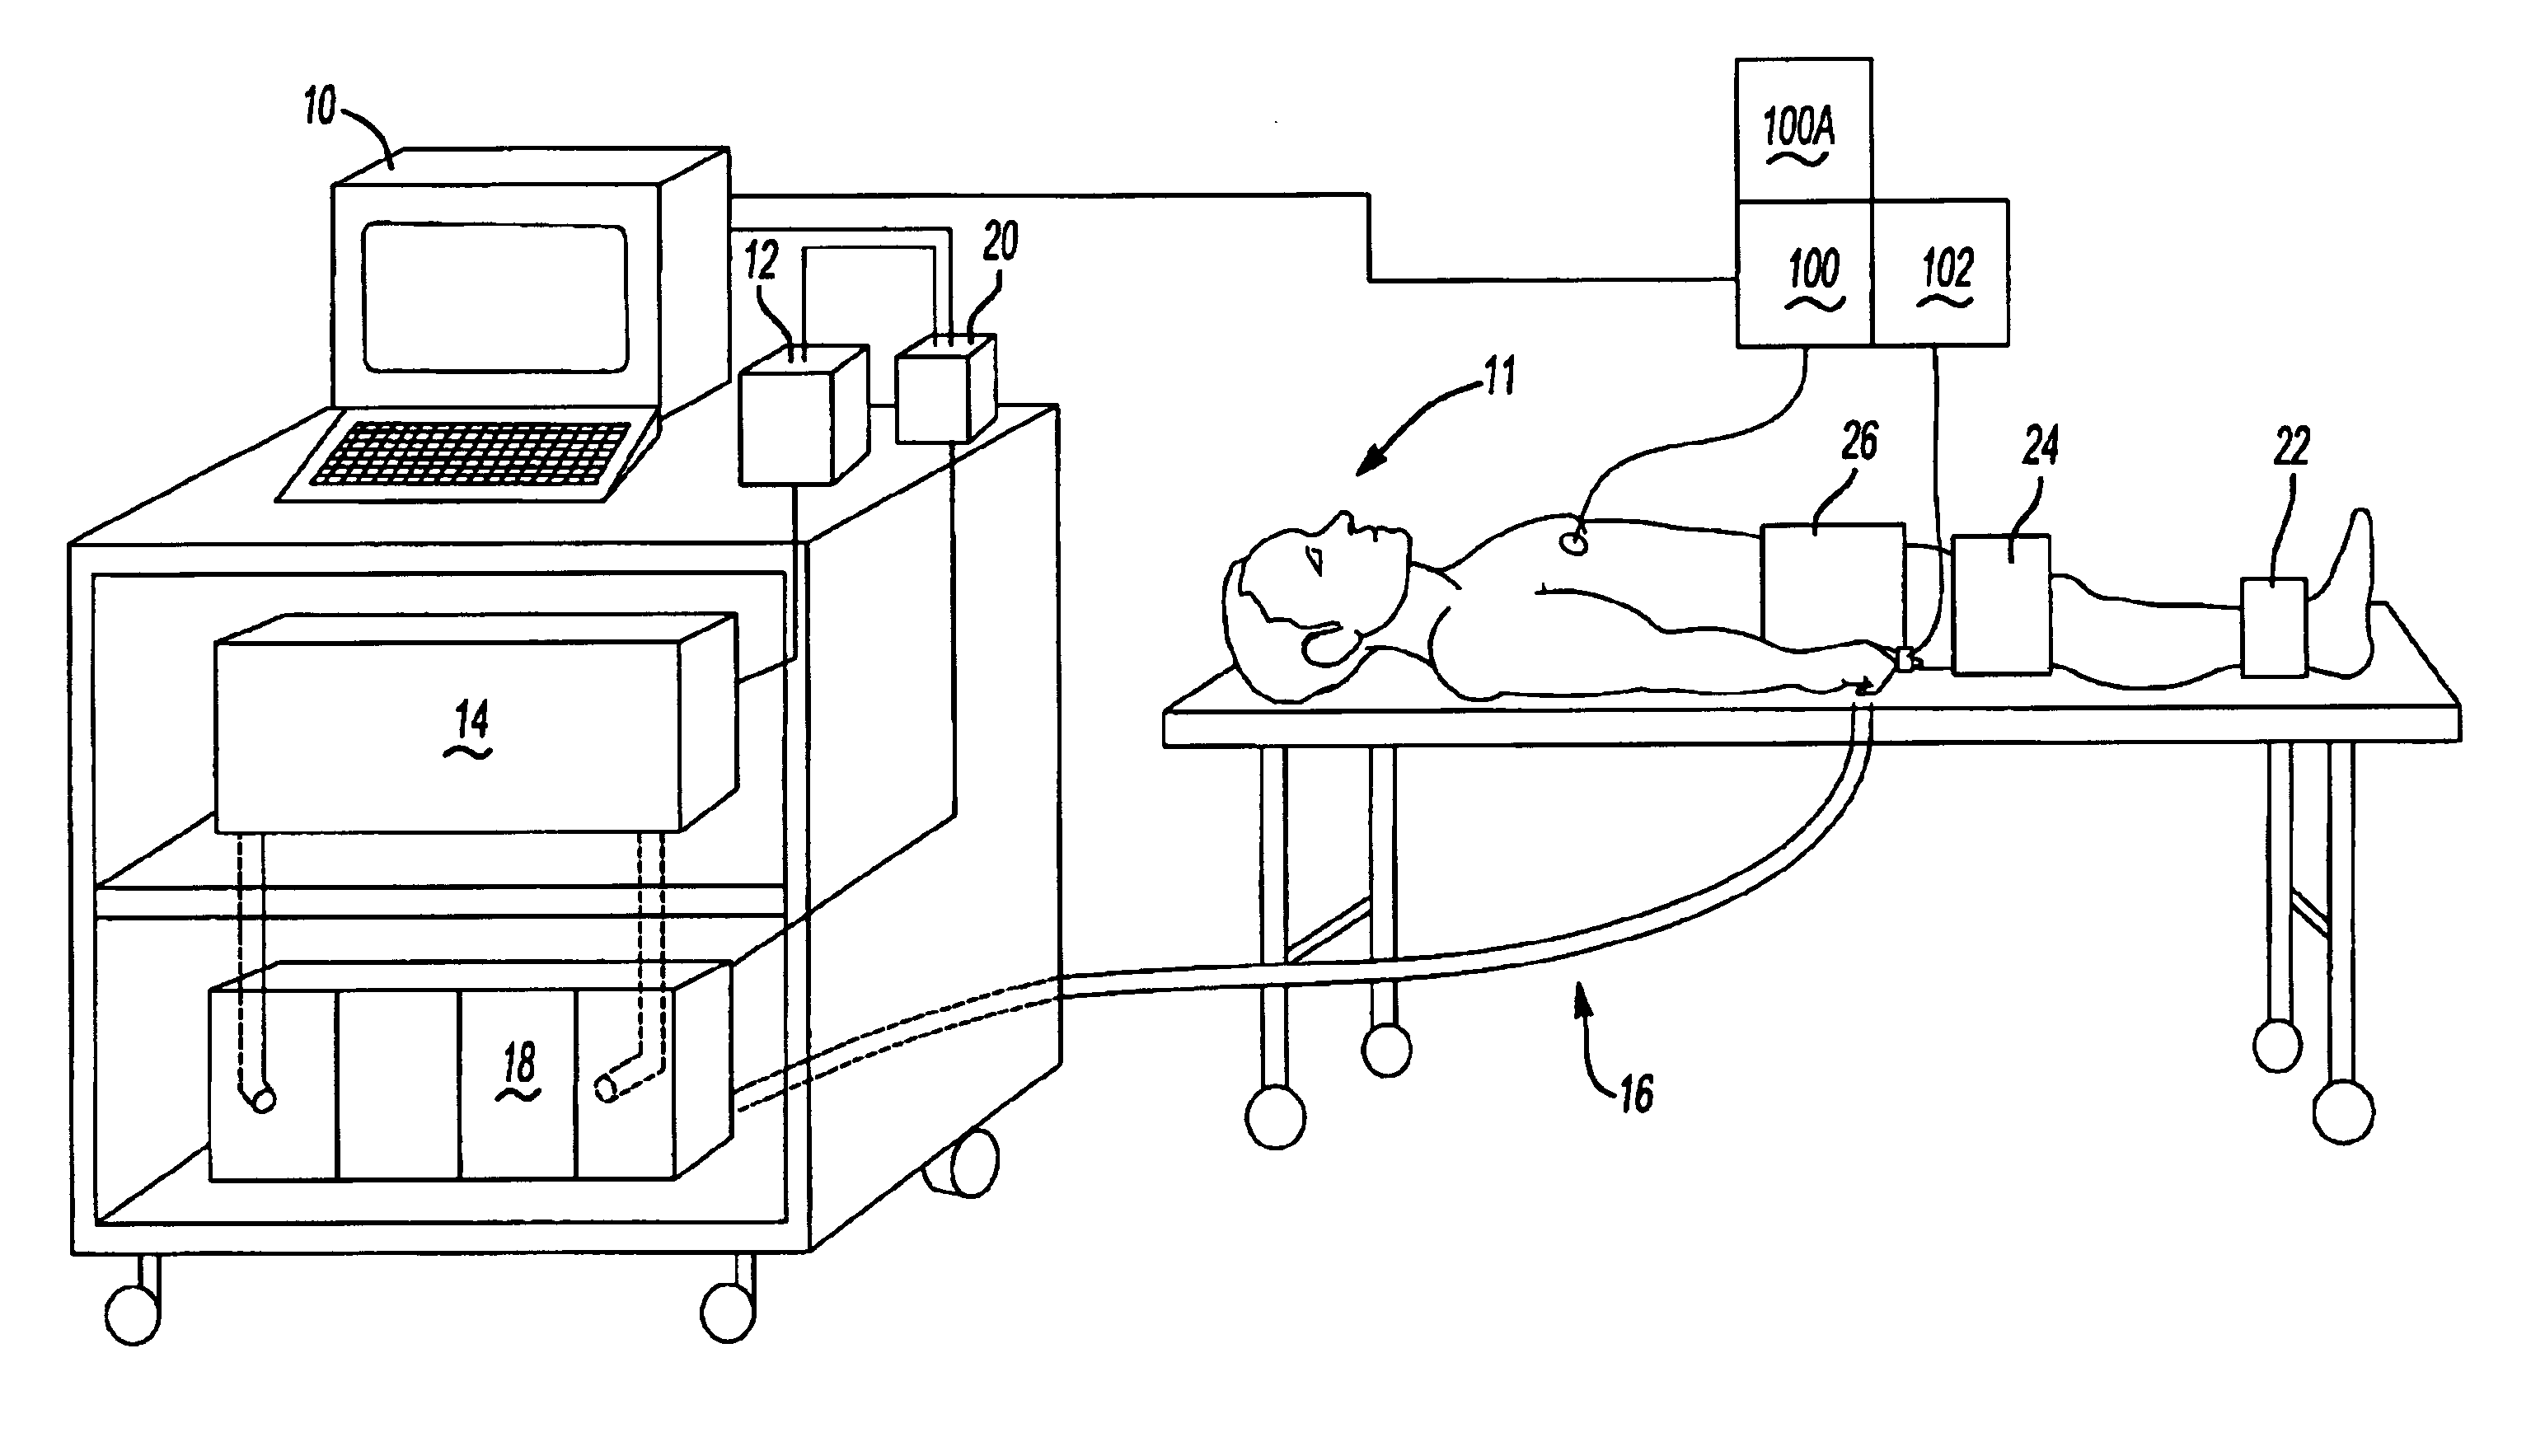 Computer-based control for a counterpulsation device using noncompressed air